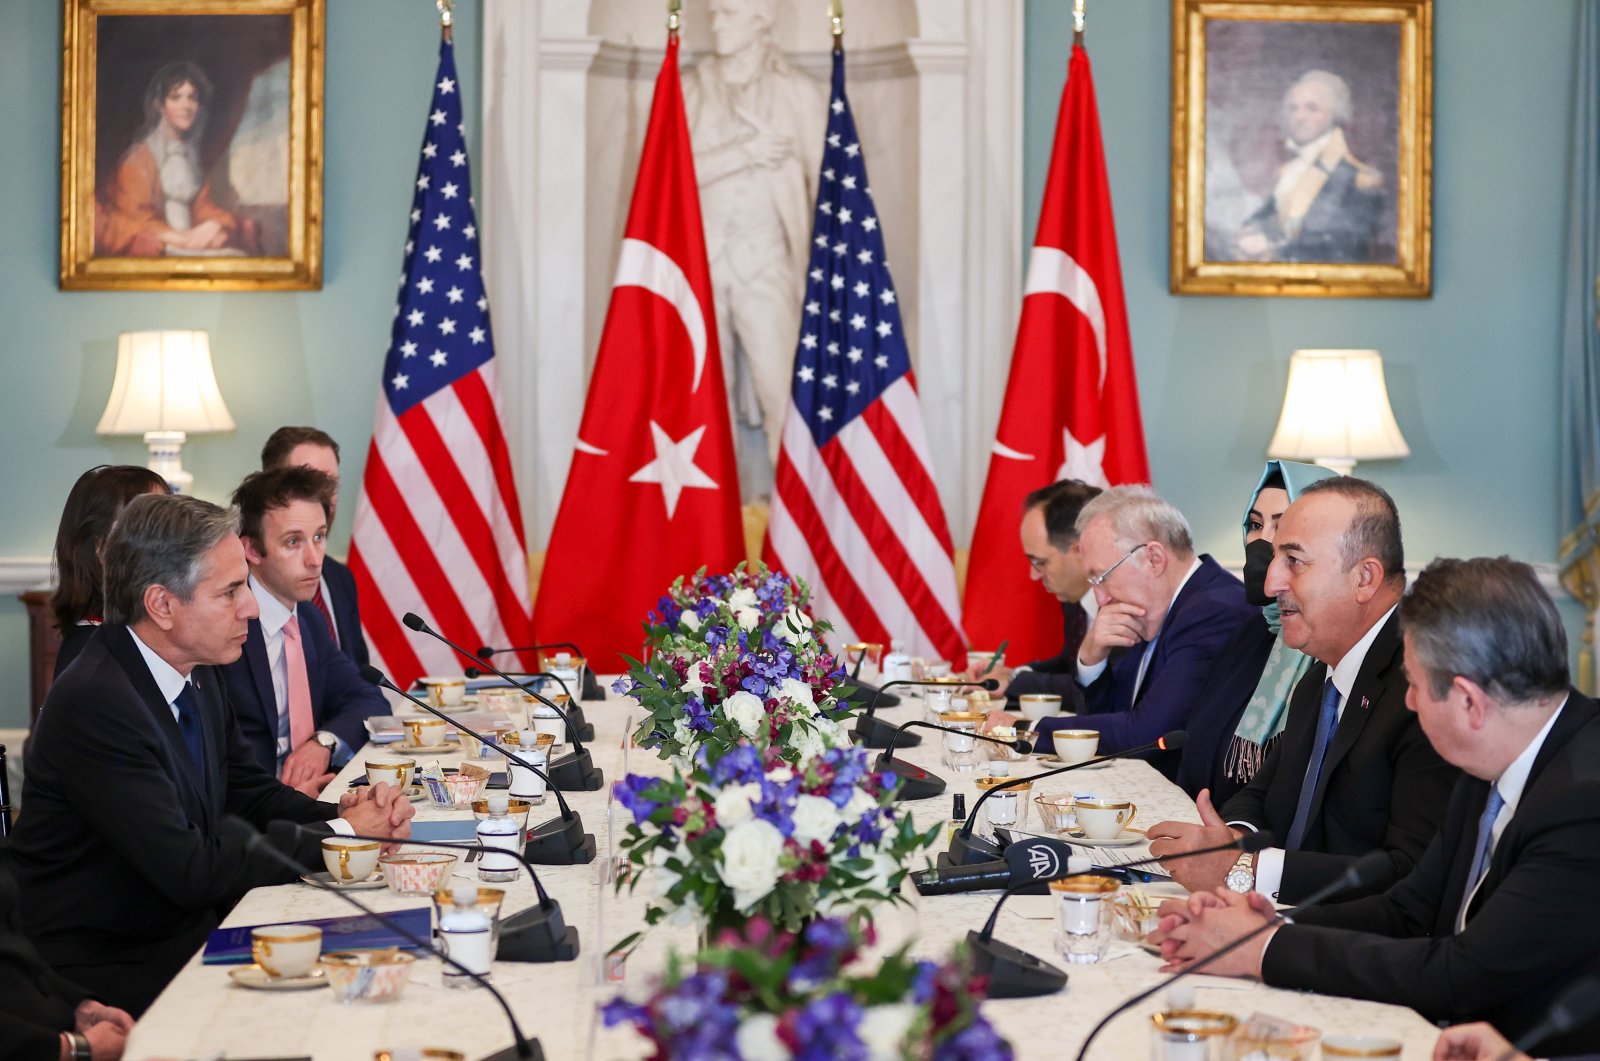 Turkish and American delegations led by Foreign Minister Mevlüt Çavuşoğlu (2nd R) and U.S. Secretary of State Antony Blinken (bottom L) attend a meeting in Washington, D.C., U.S., Jan. 18, 2023. (AA Photo)